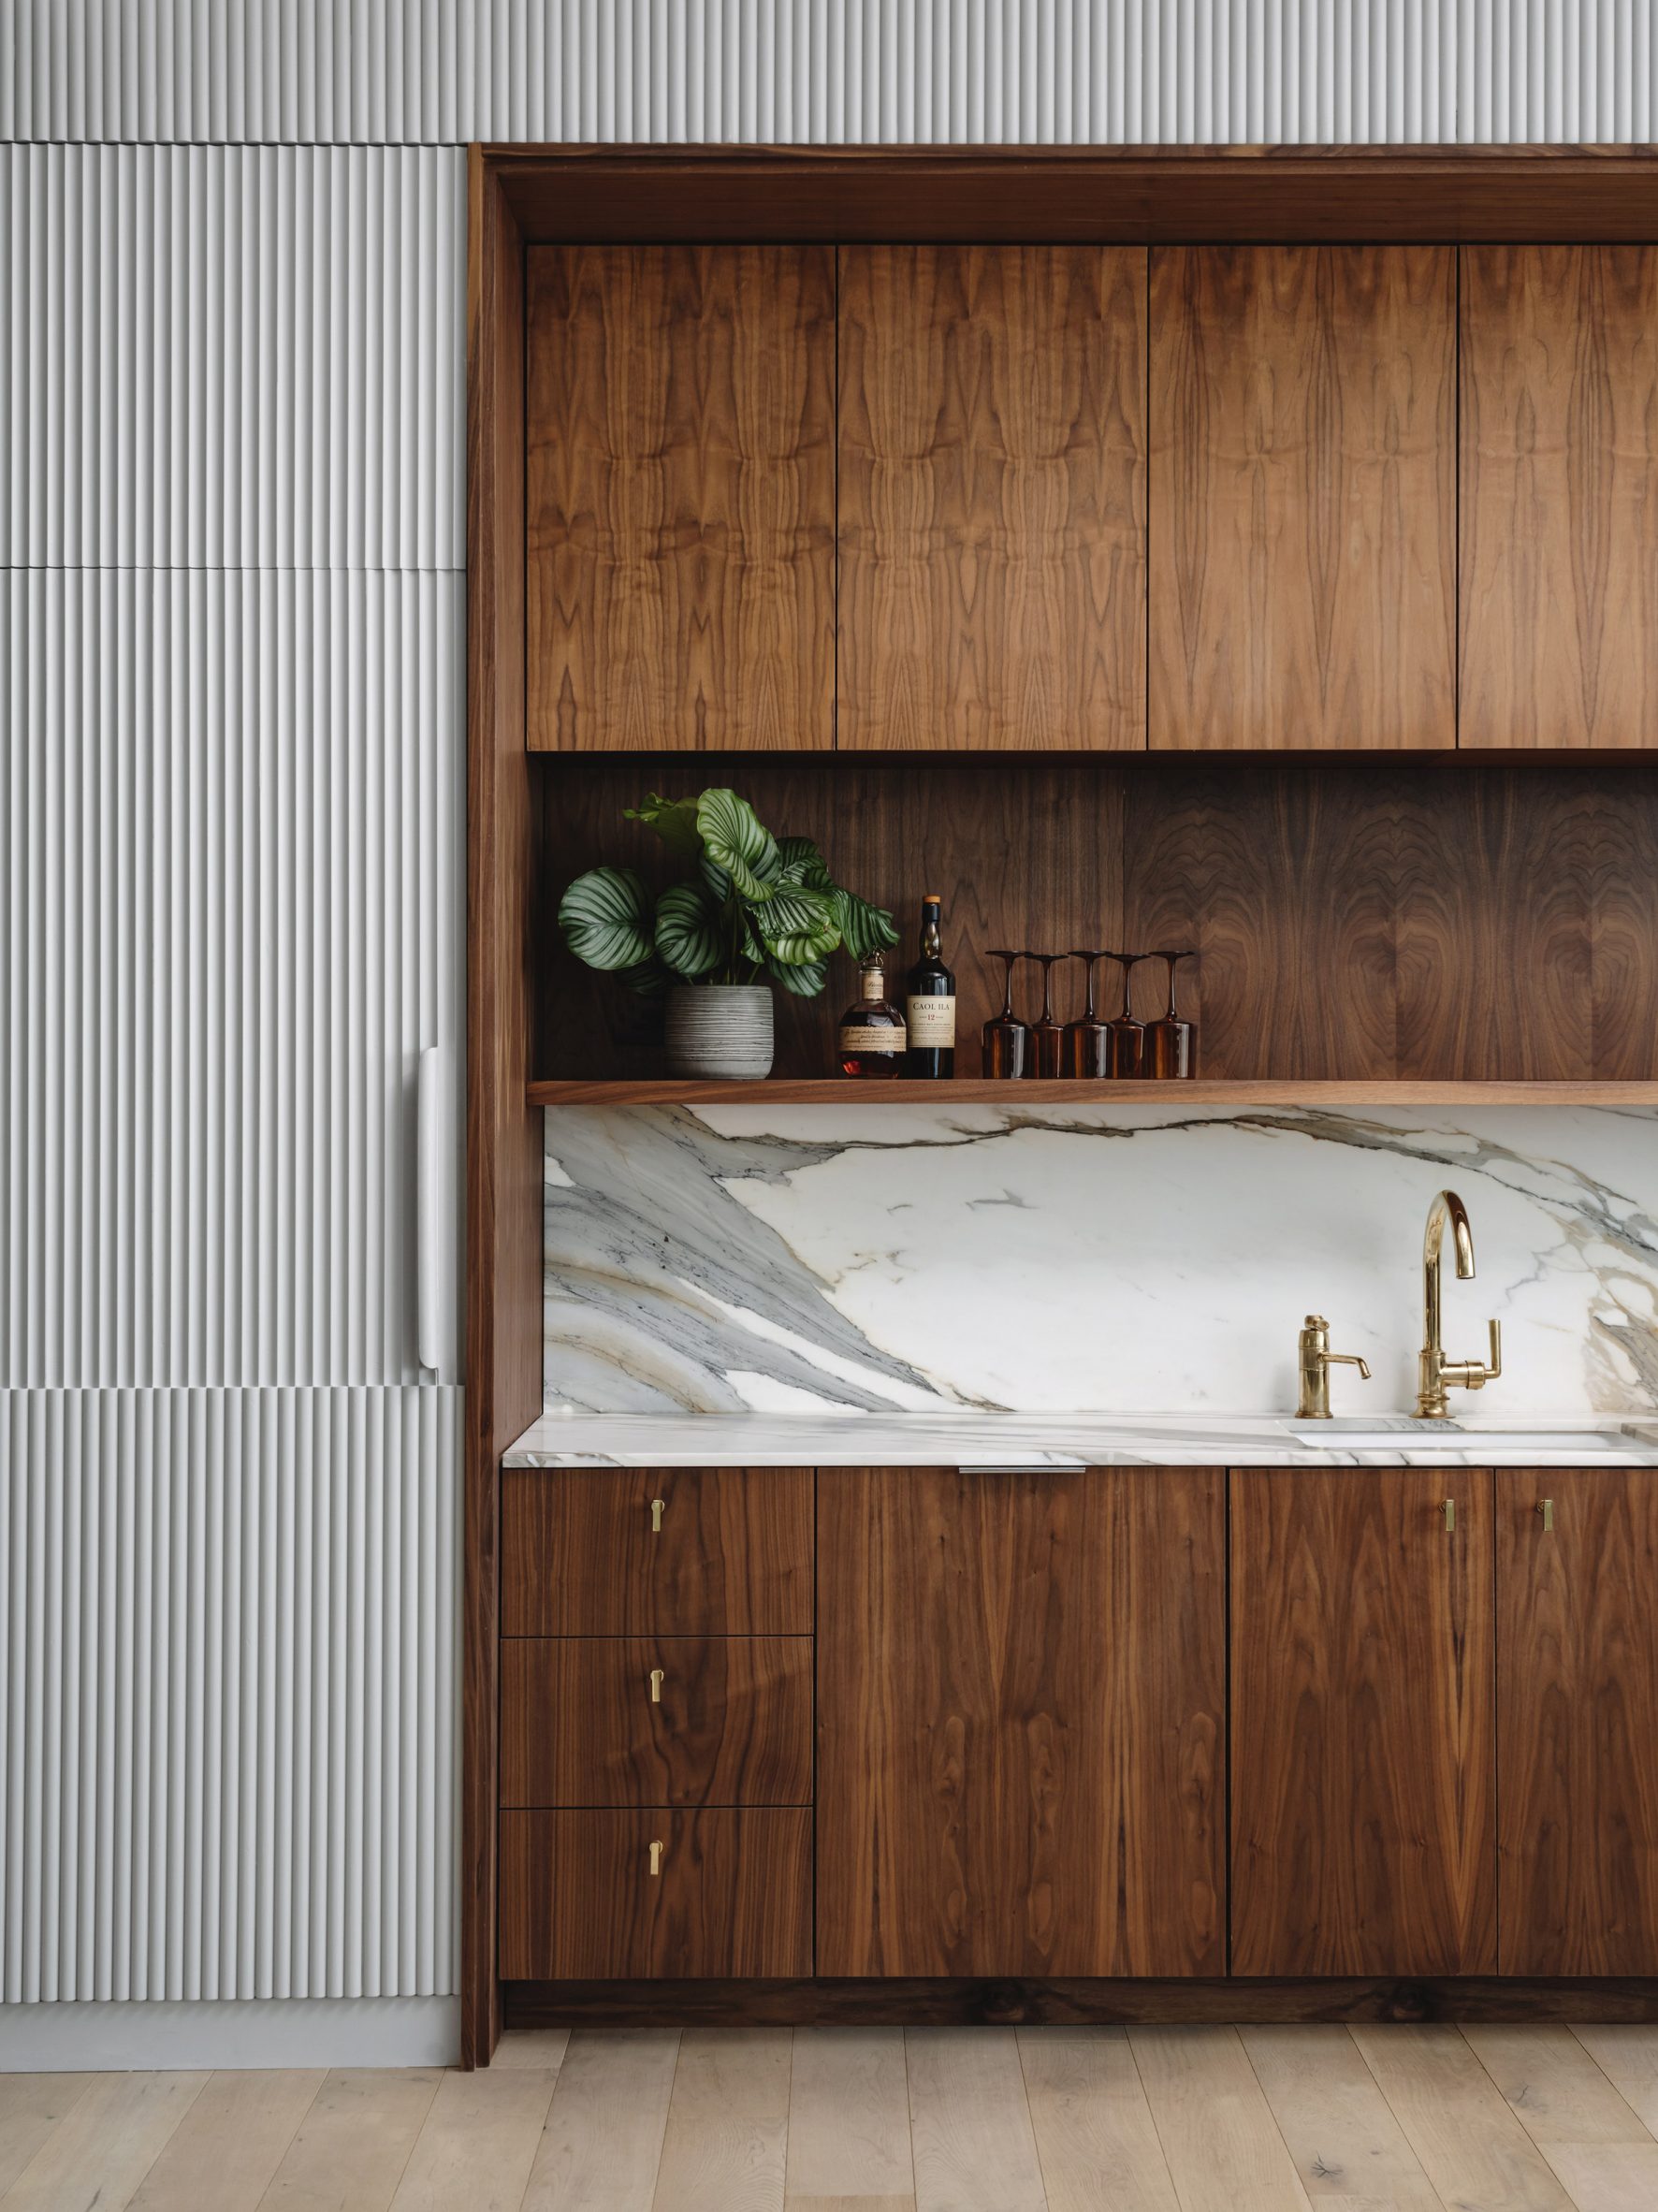 Wooden cabinetry and grey pannelling